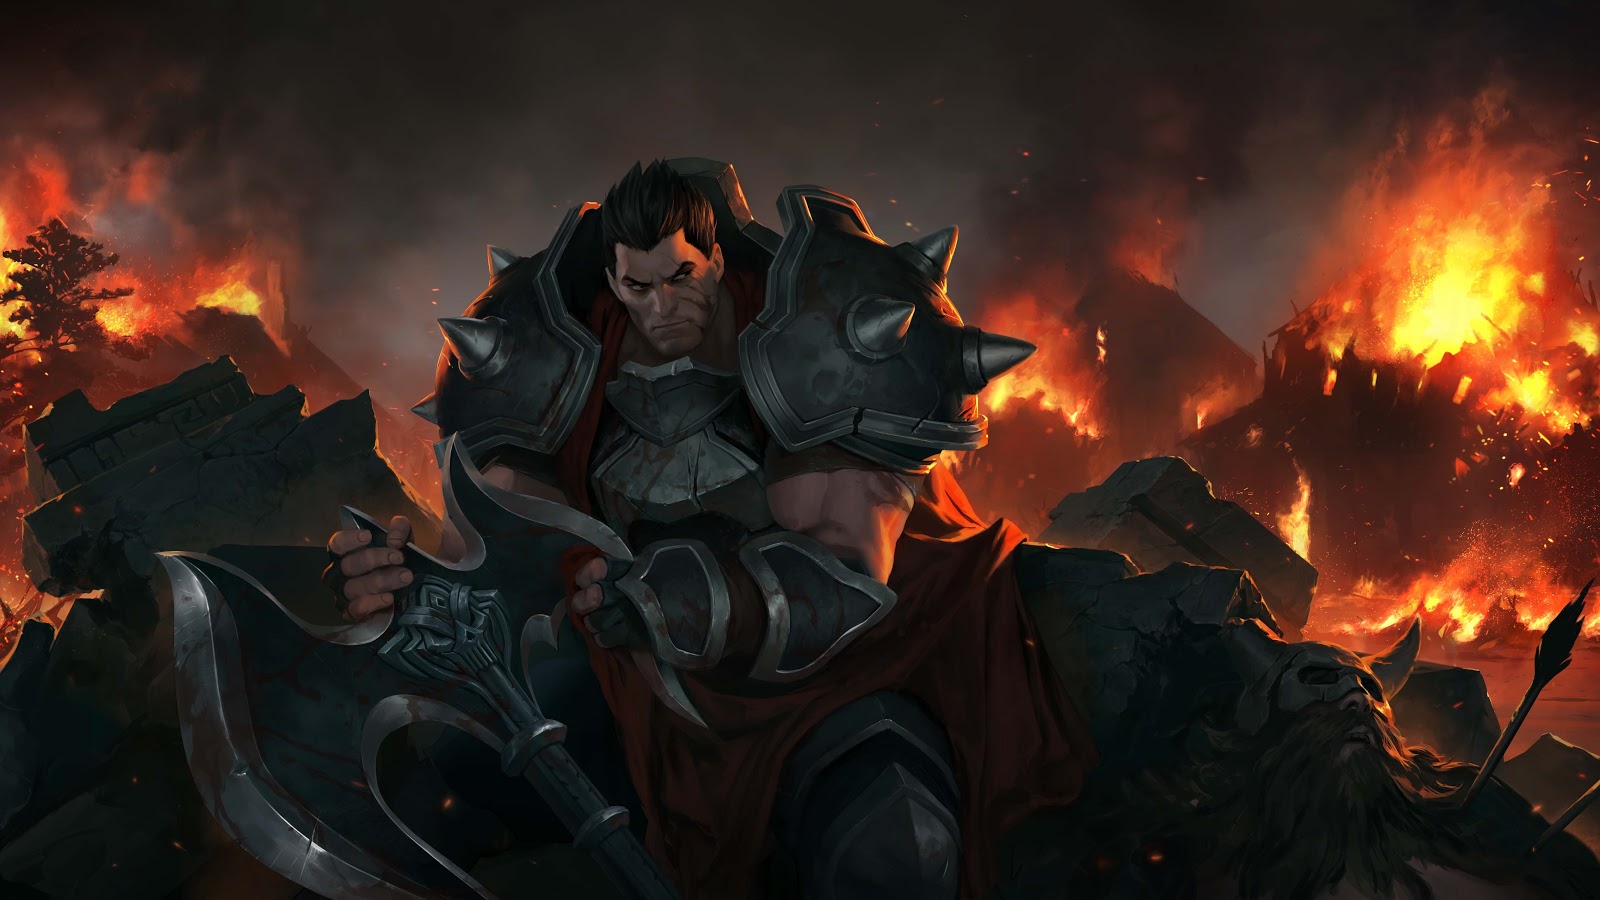 Darius sits amongst rubble with the blade of his axe in his hands, looking back at the burning destruction behind him.